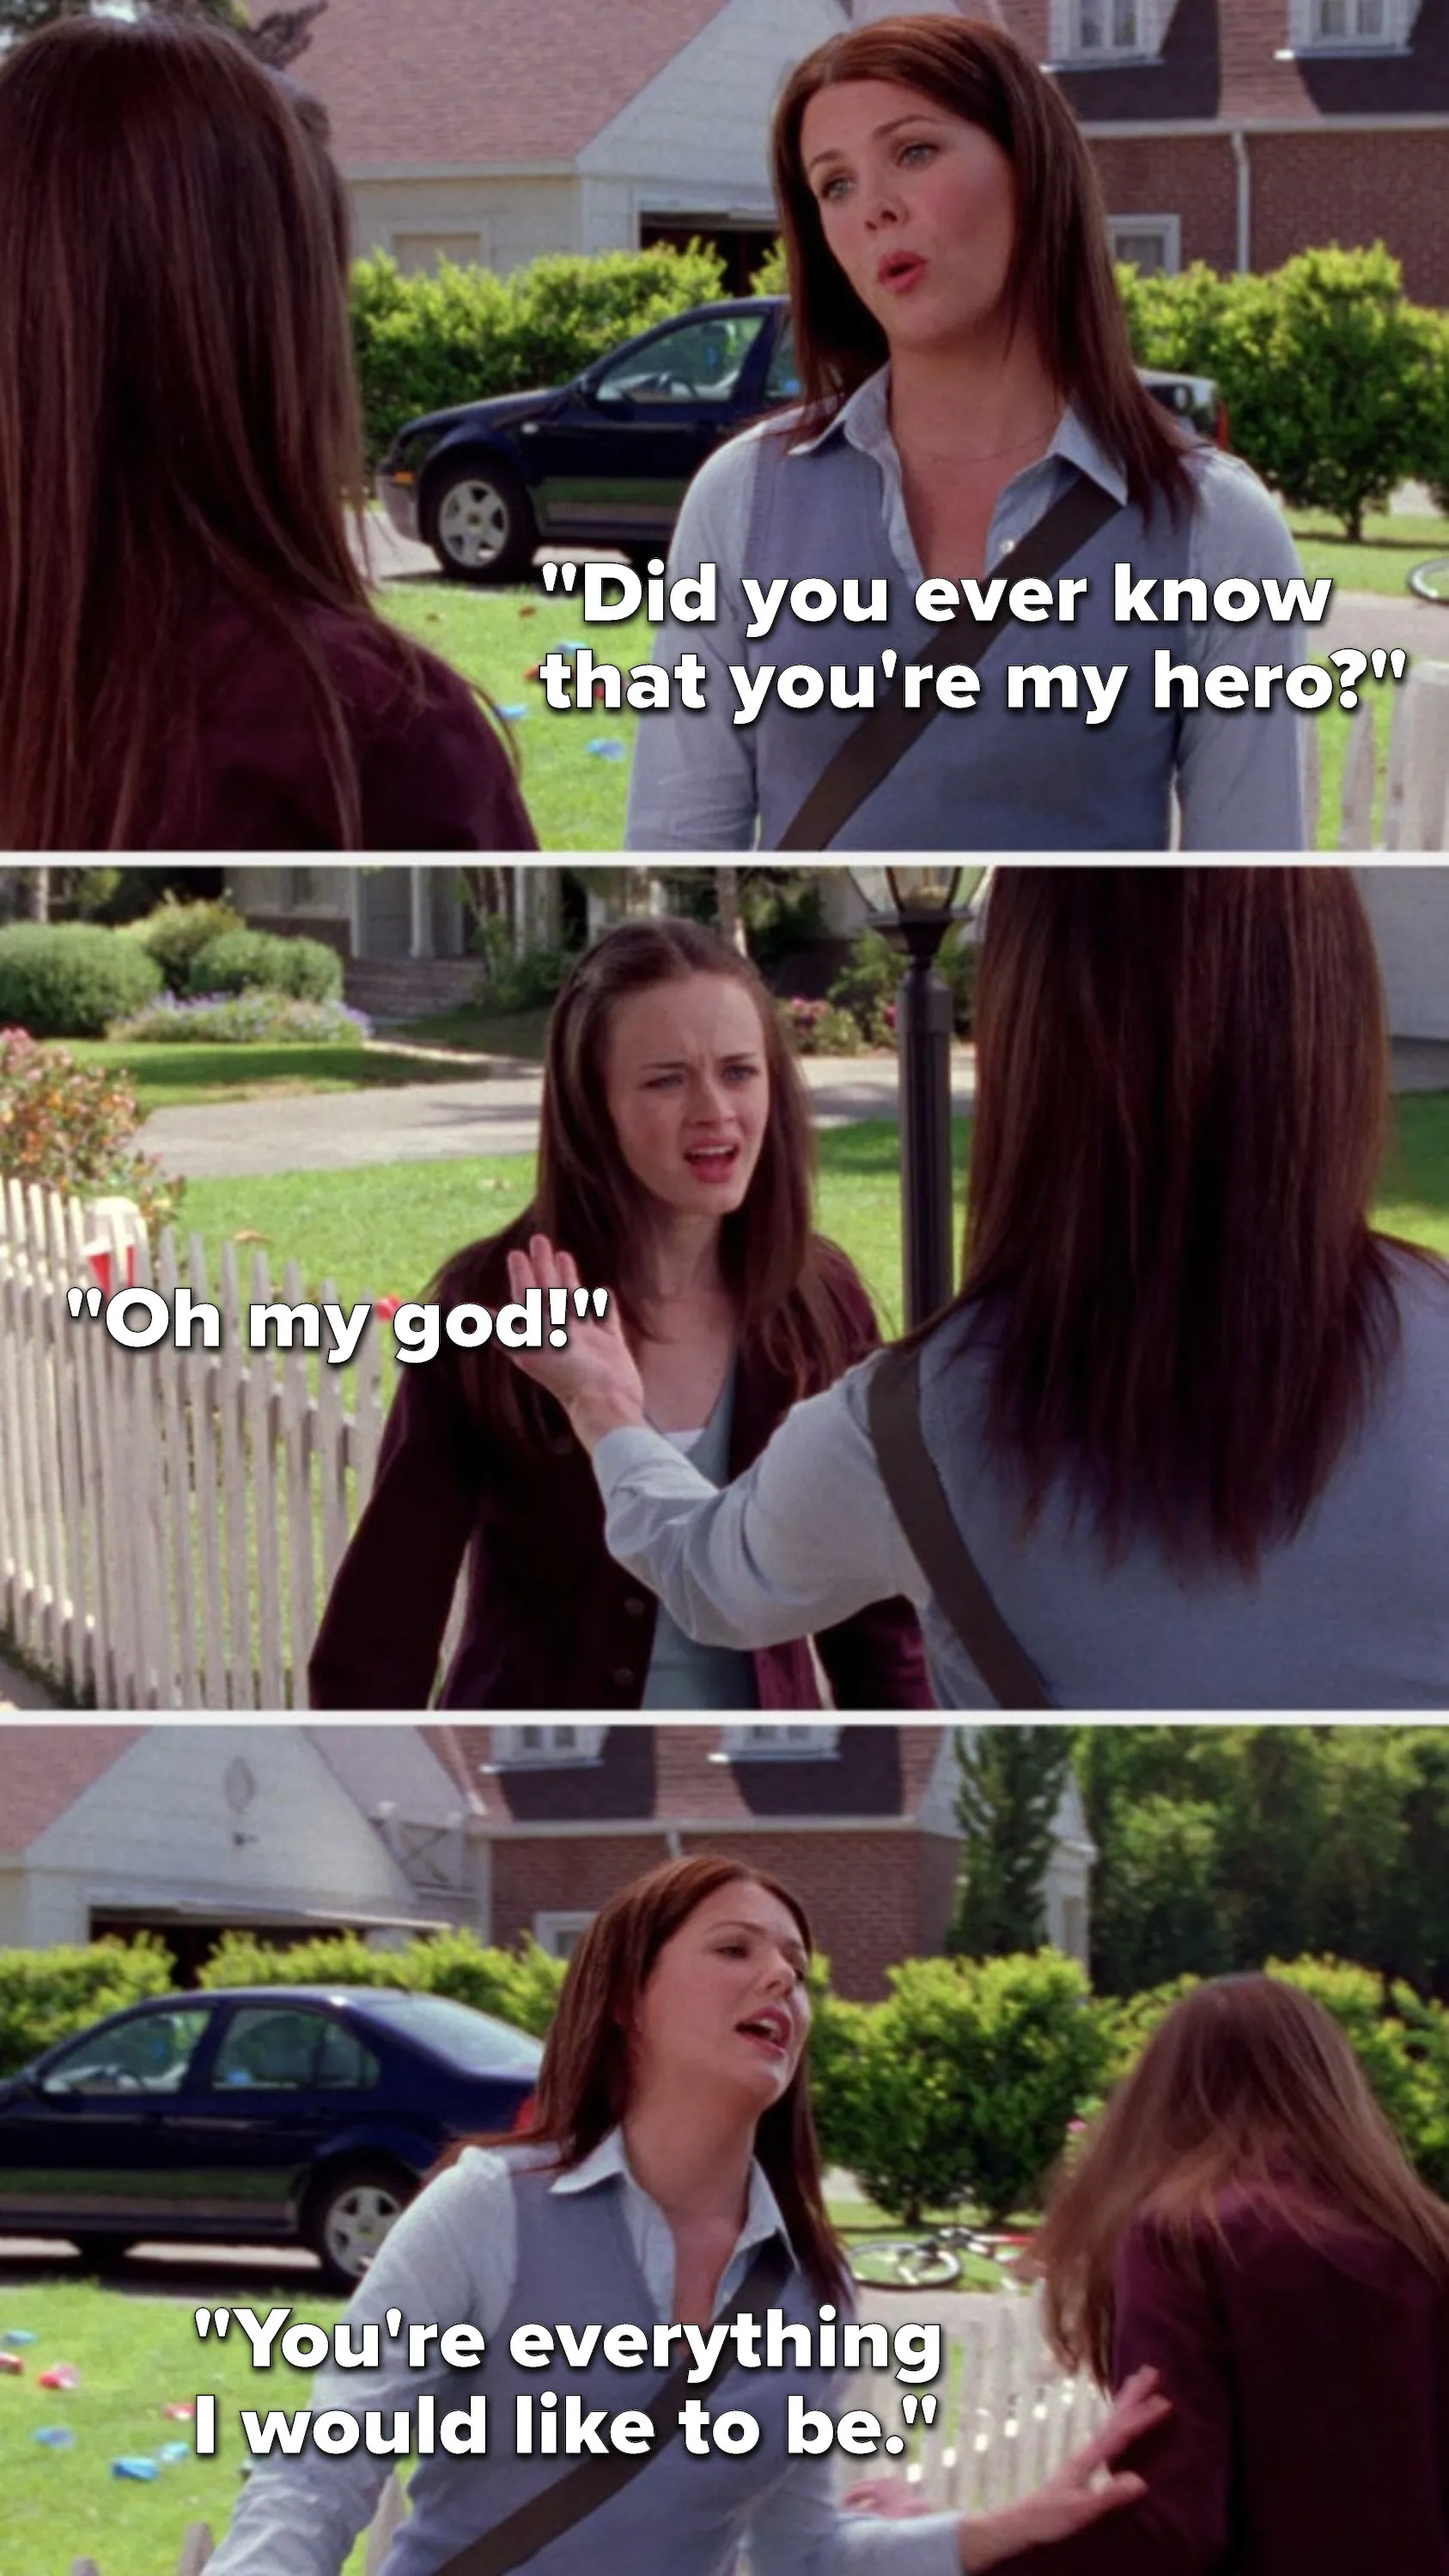 20 Times Lorelai From "Gilmore Girls" Was The Best Mom